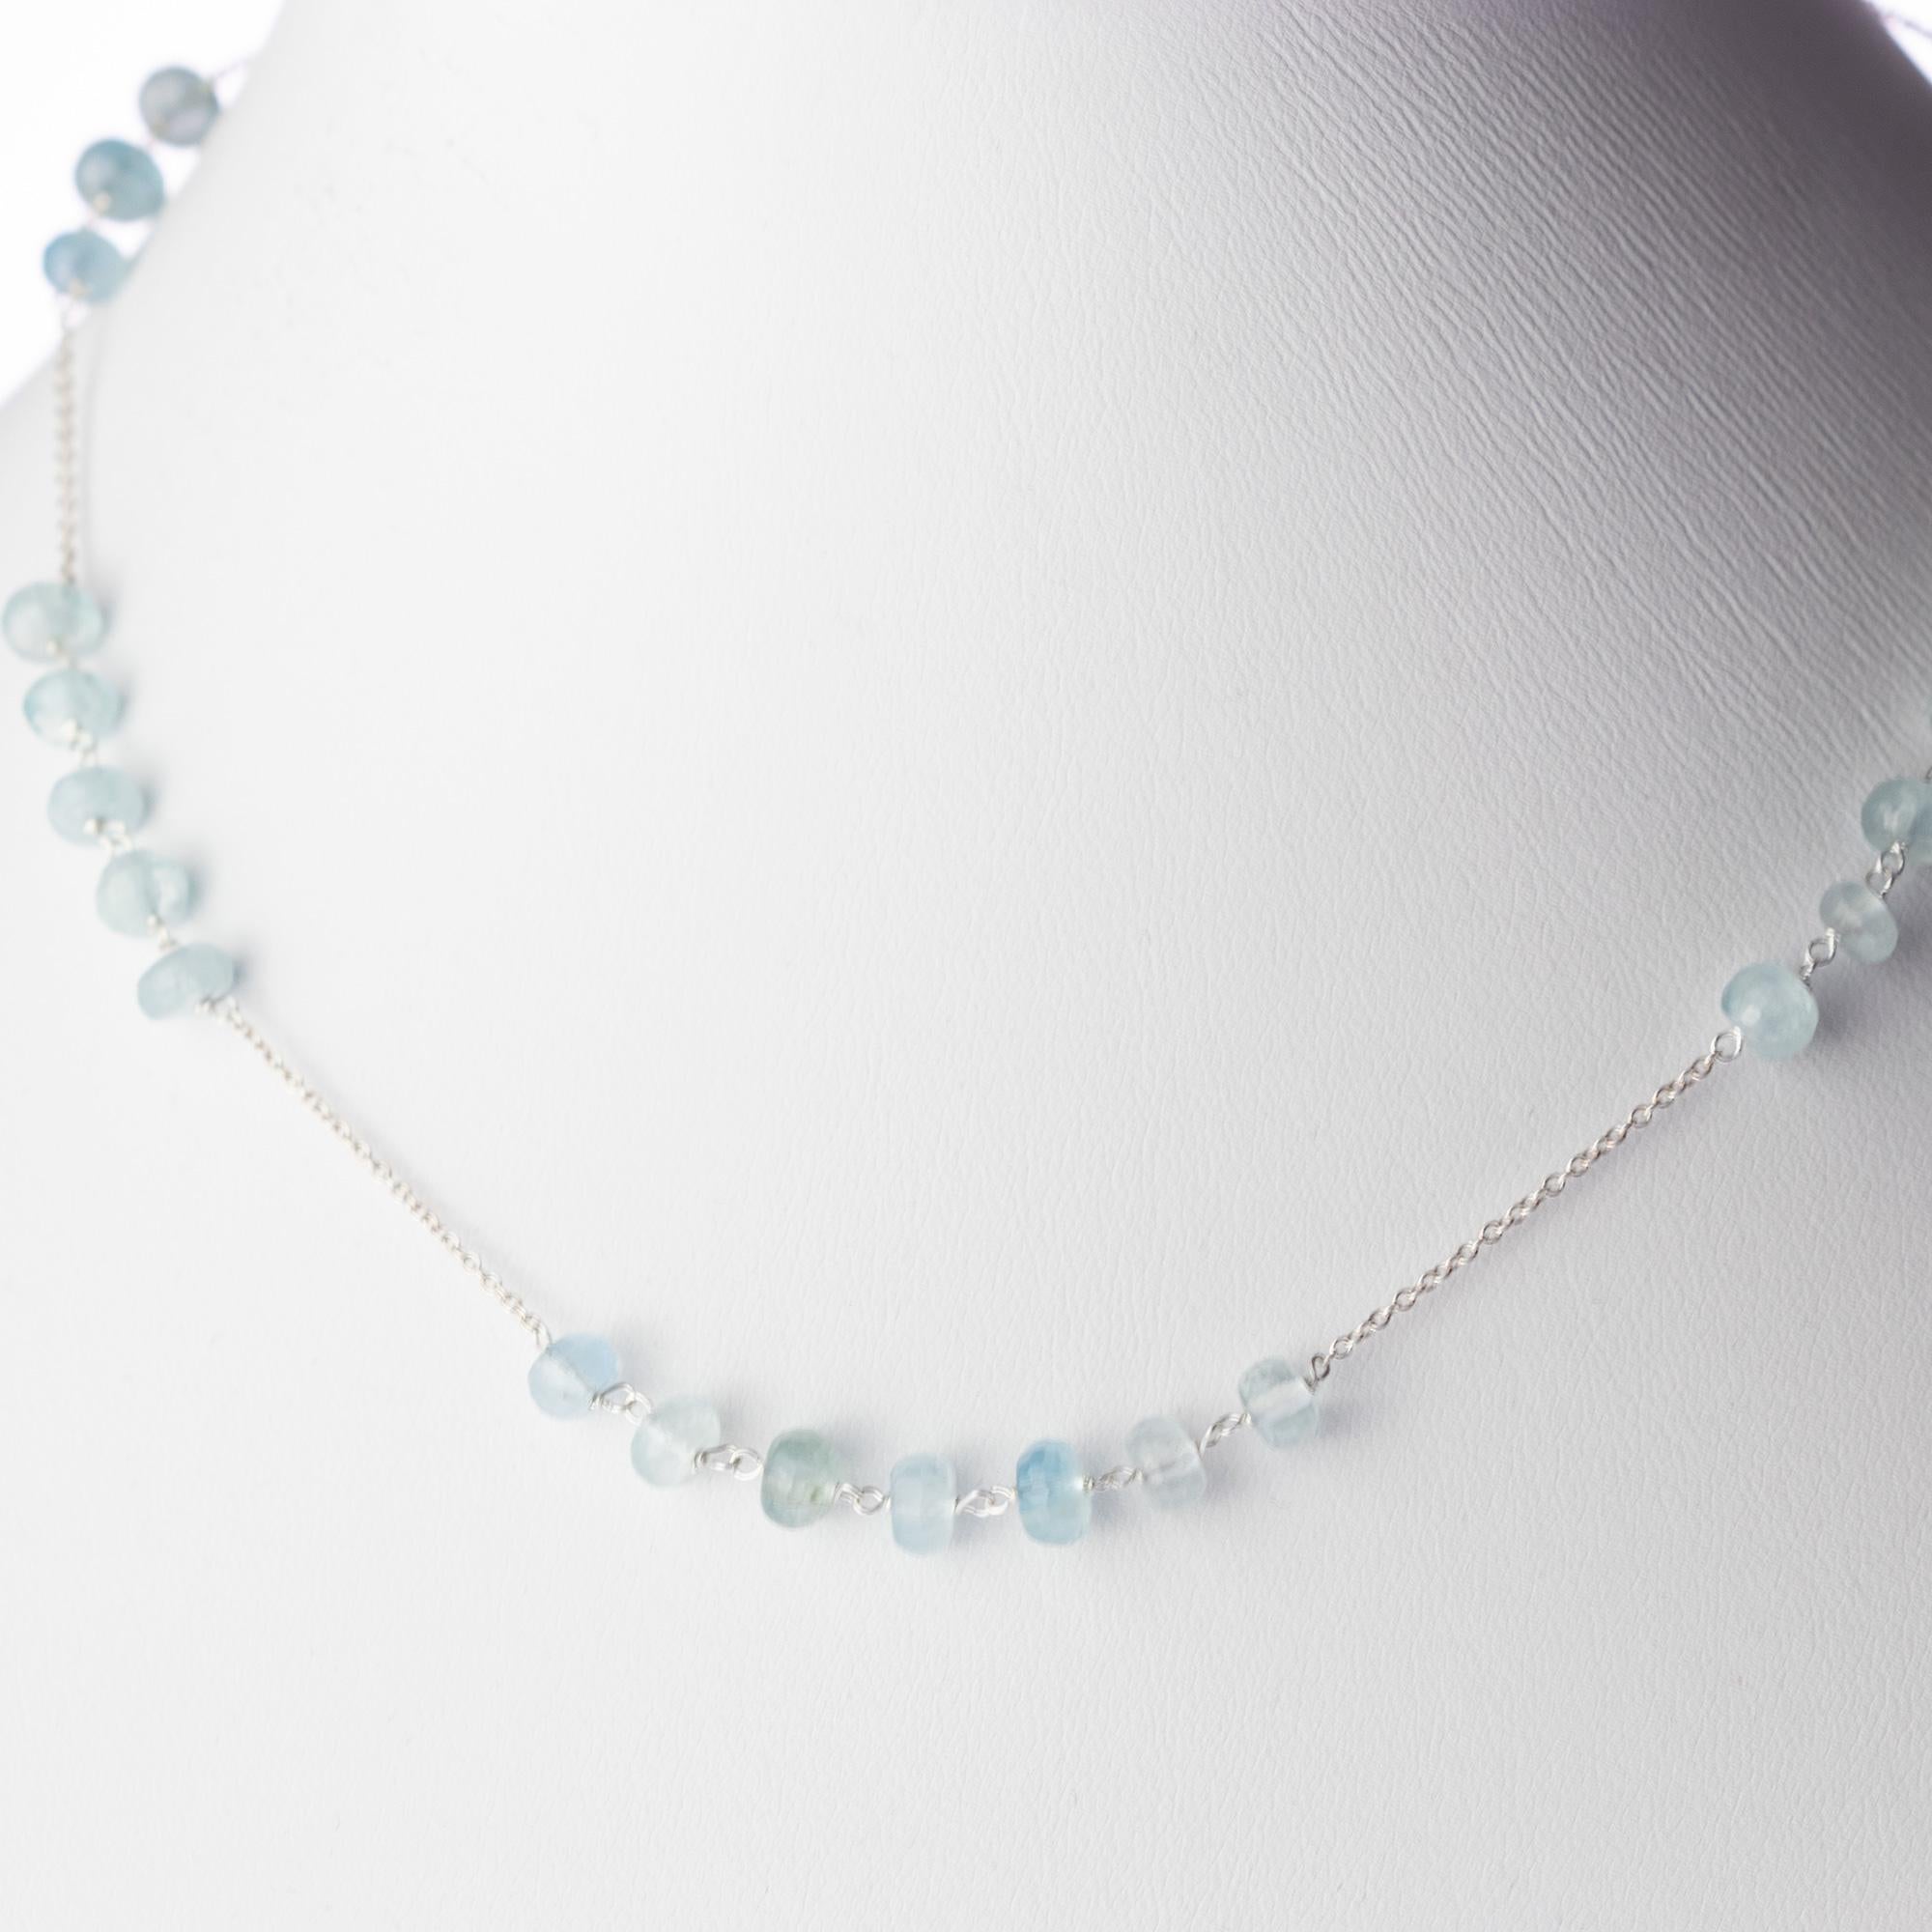 Magnificent natural precious jewellery on elegant 18 karat white gold setting. Marvellous necklace starring pure aquamarine raw rondelles, for a bright charm of uniqueness.

An elegant touch of glamour at your fingertips. Let yourself be tempted by